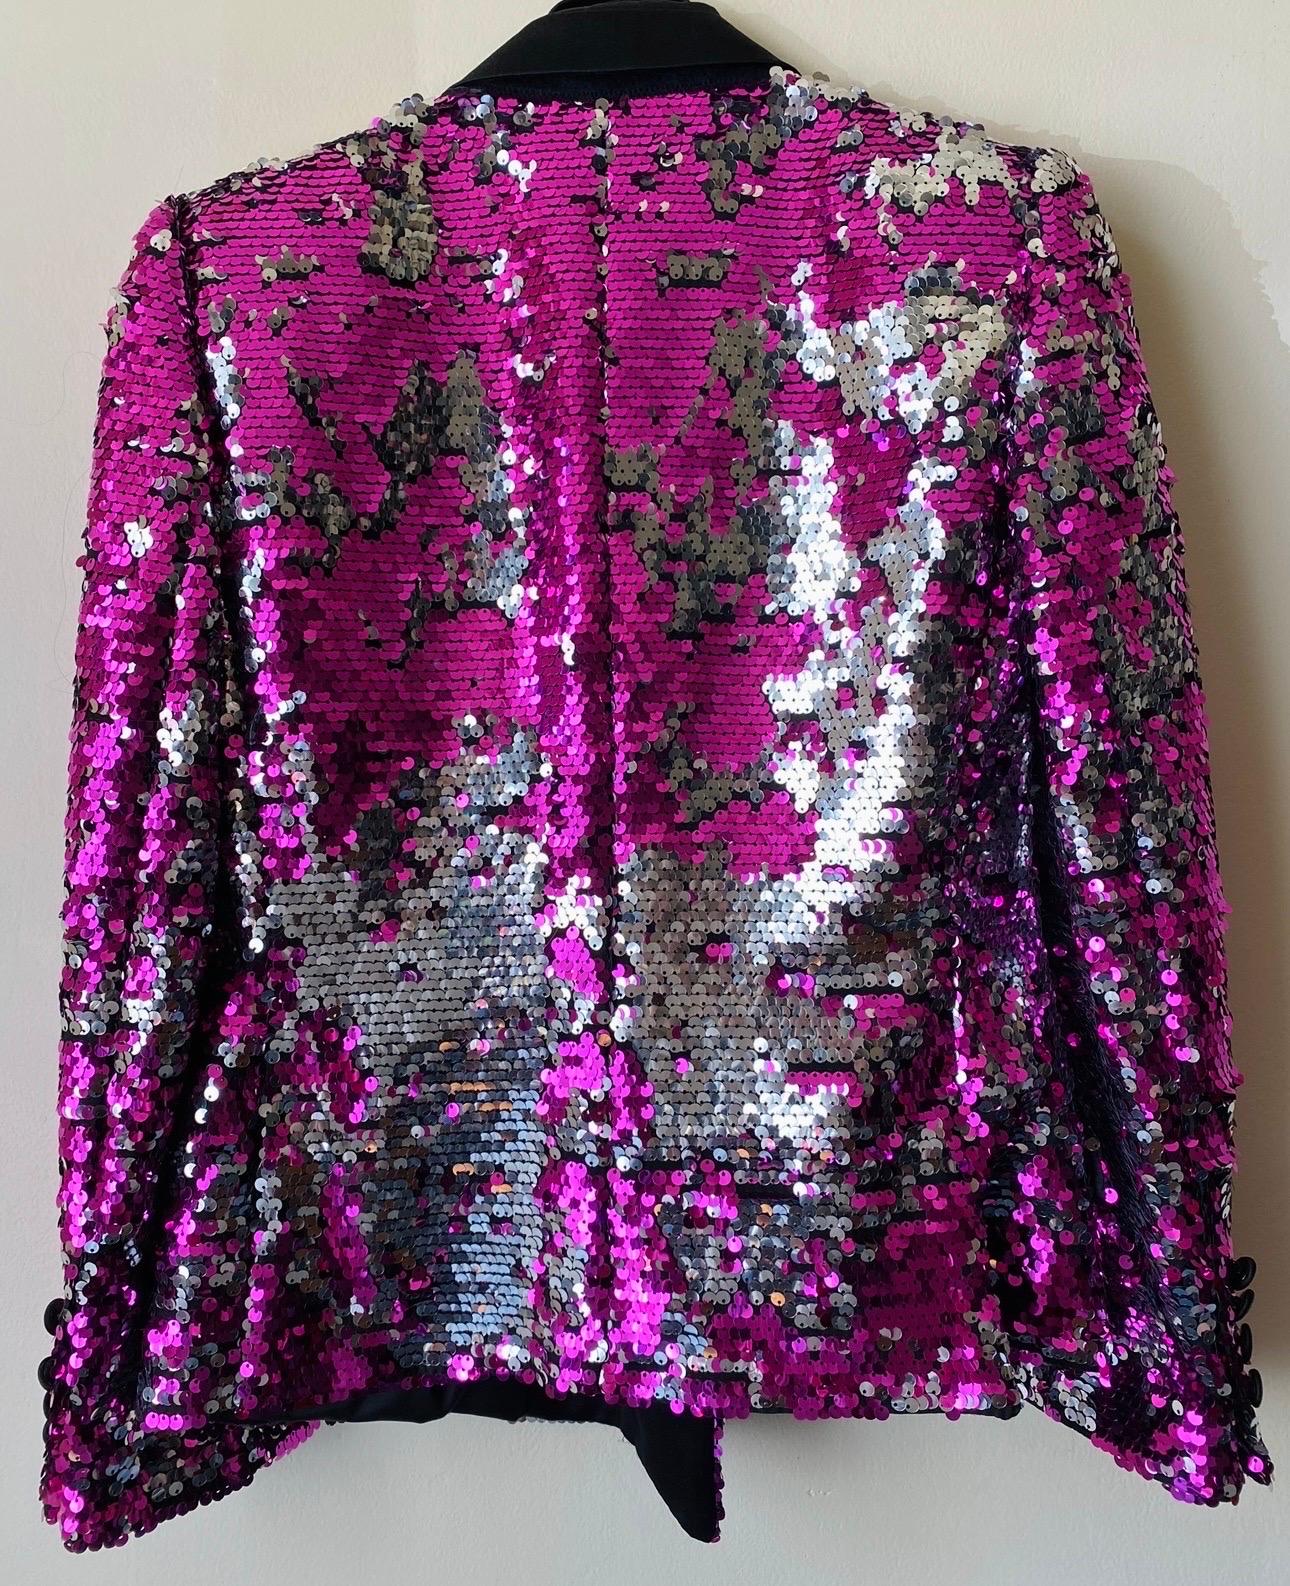 Dolce & Gabbana runway 2011 pink sequined jacket  For Sale 1